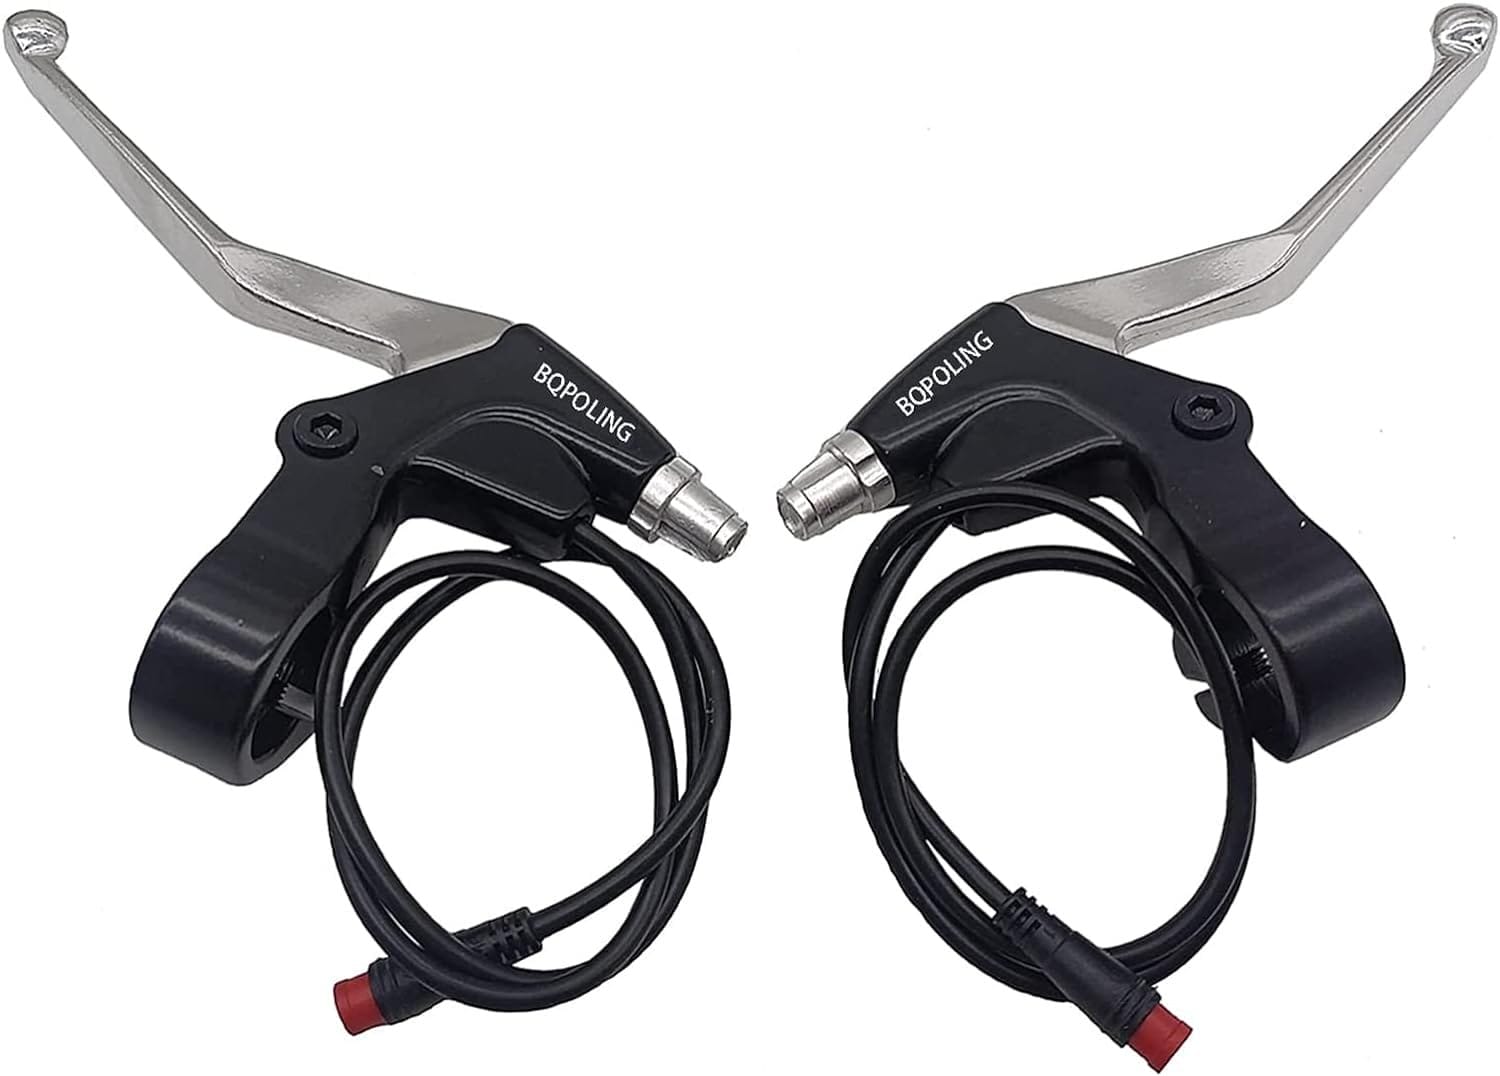 You are currently viewing BQPOLING Electronic Brake Lever Set Review